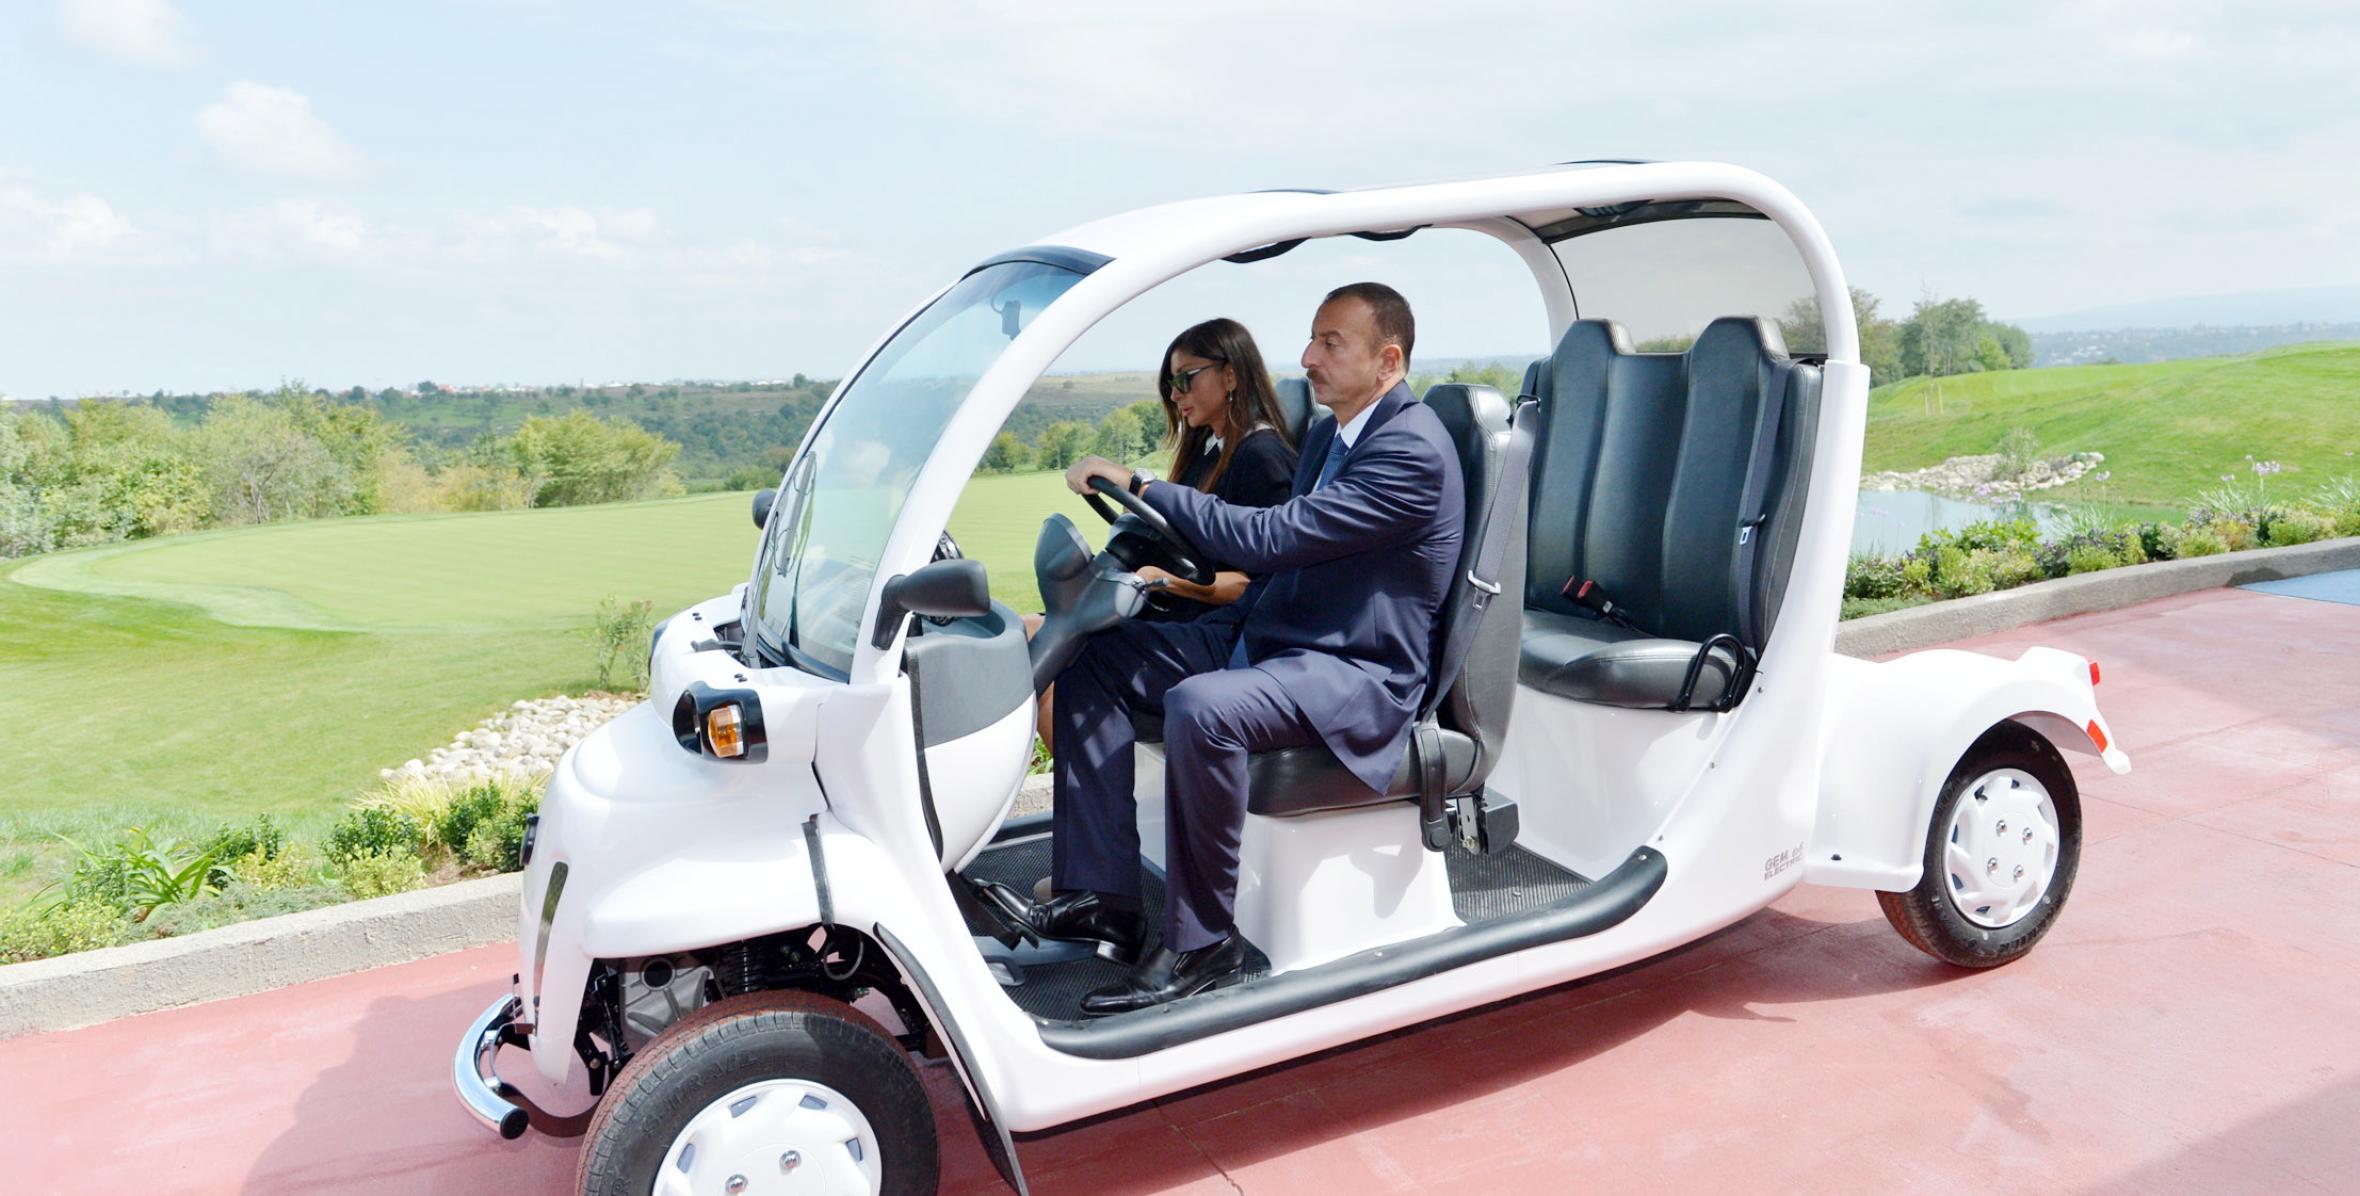 Ilham Aliyev attended the opening of the Azerbaijan National Golf Club in Guba